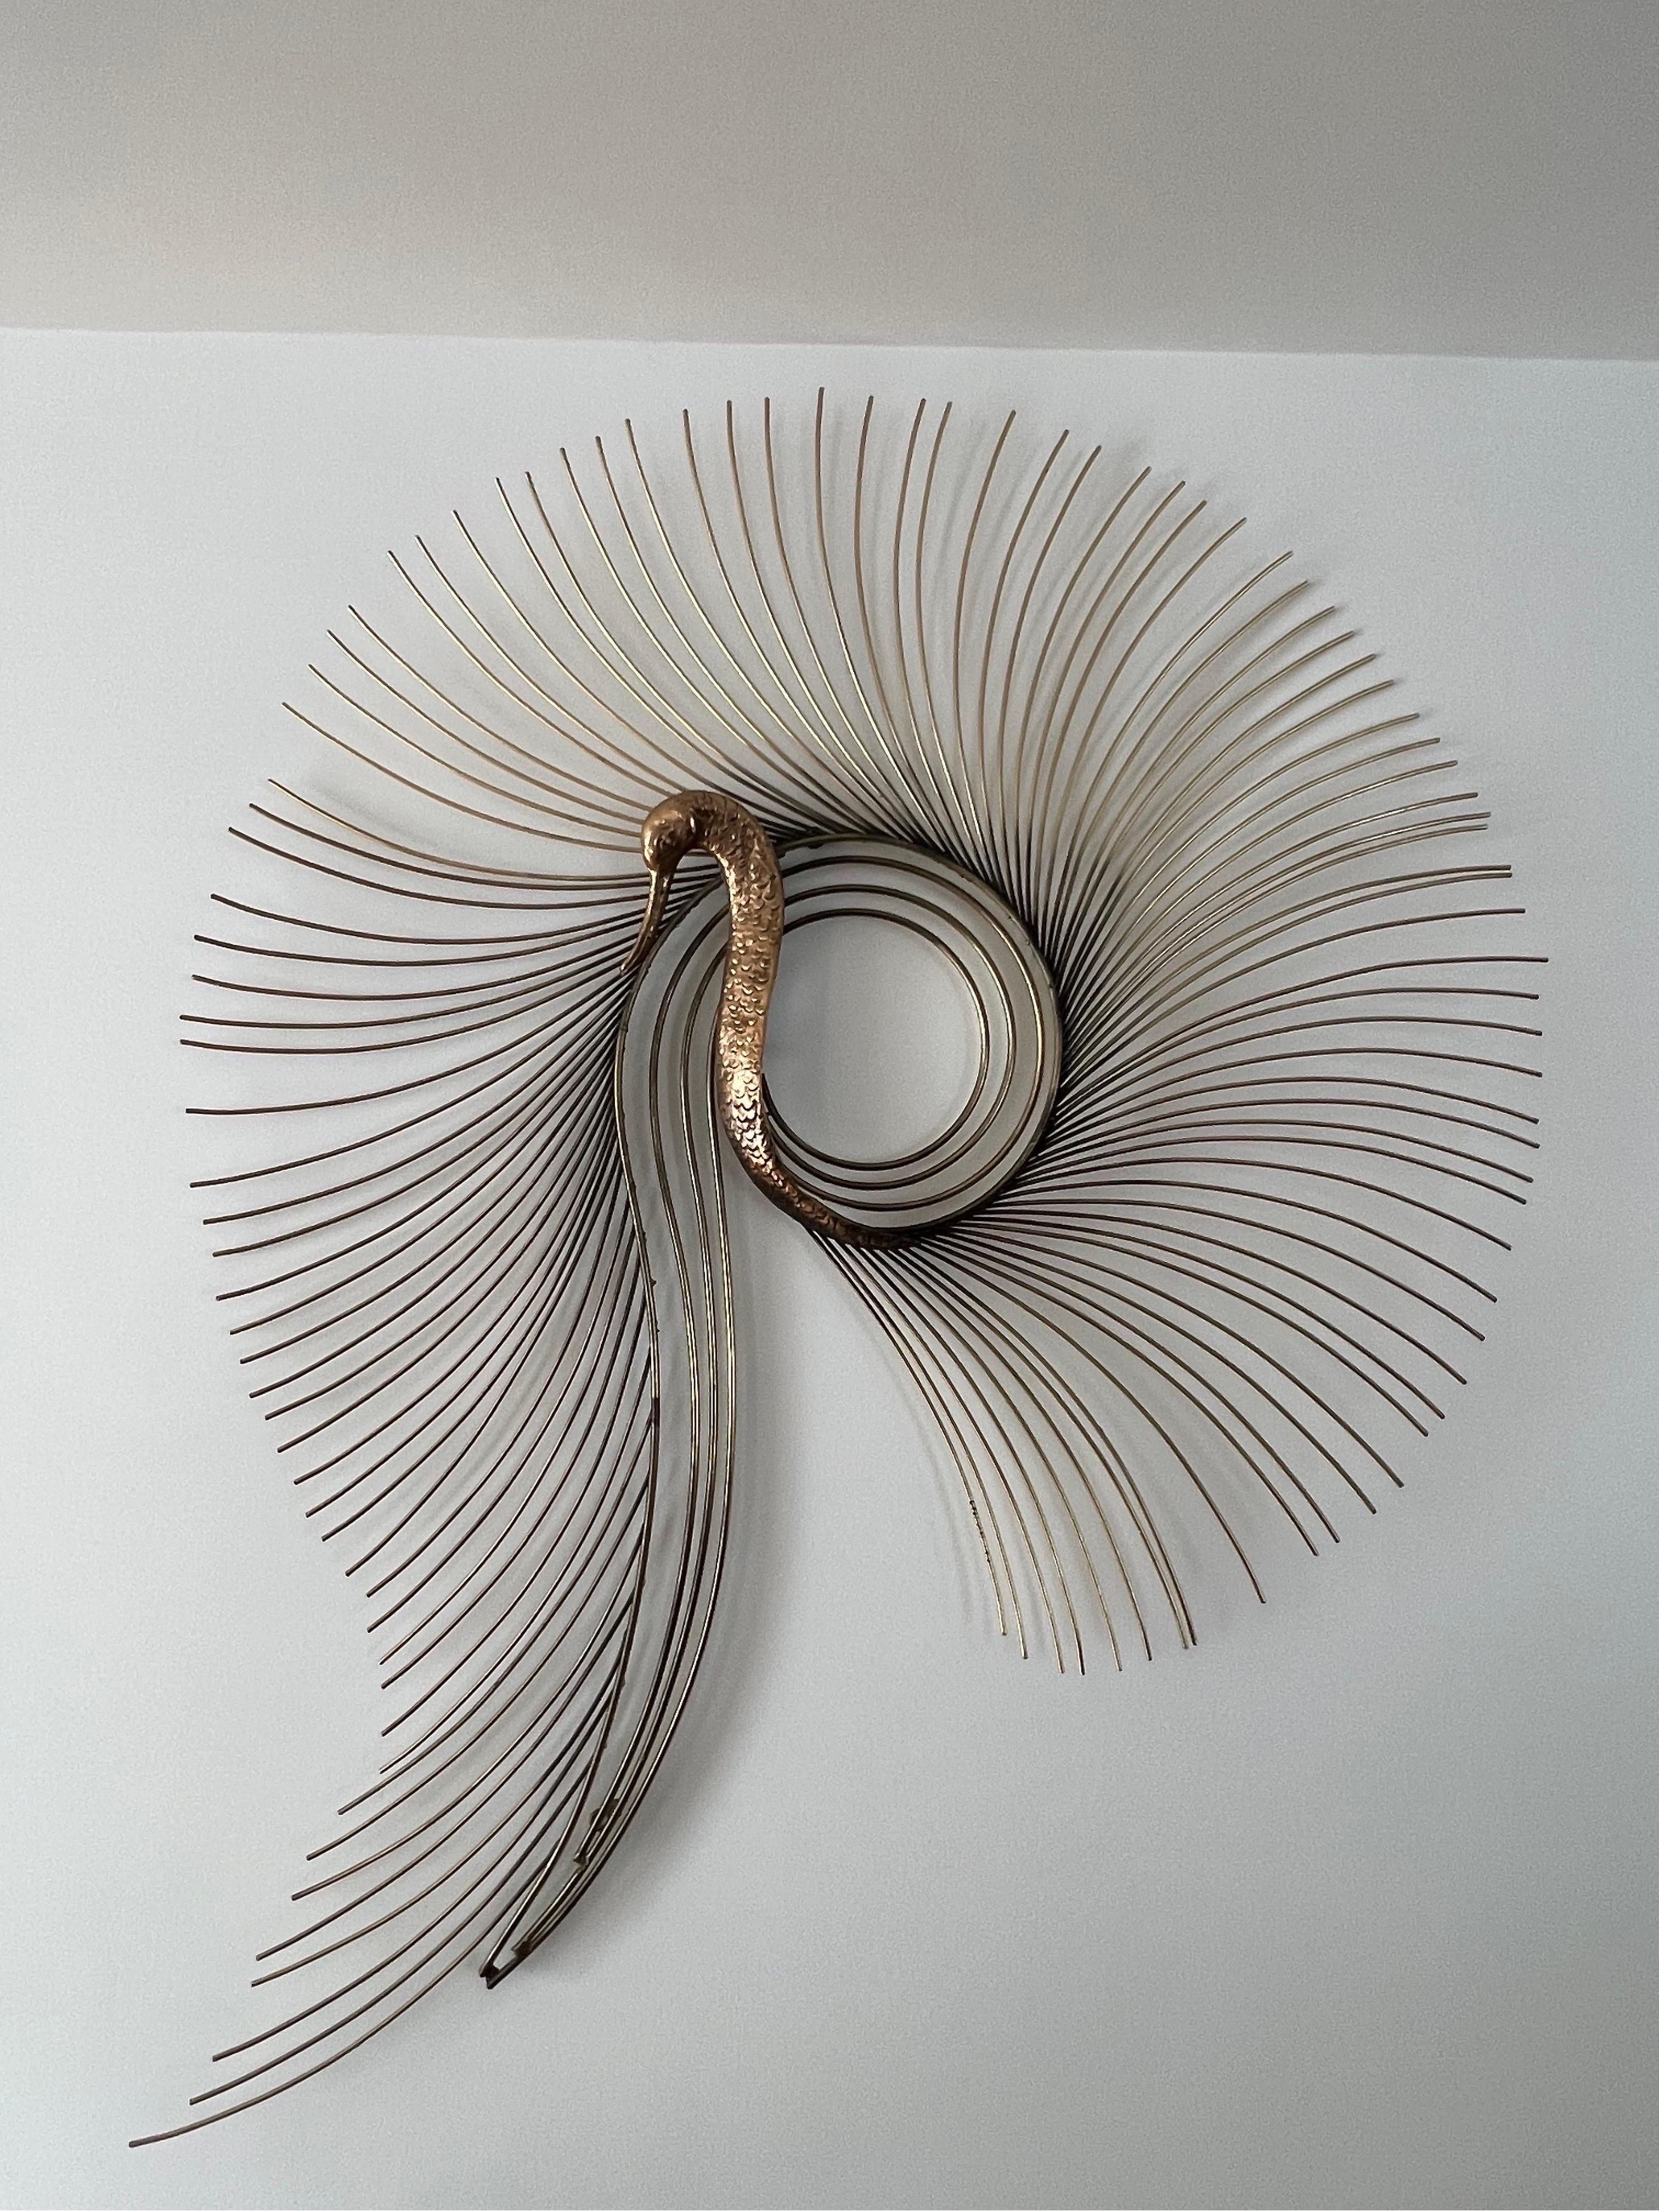 Brass and Metal Swan Wall Sculpture by Curtis Jere, circa 1987

Sophisticated and well made wall art that will enhance any room.